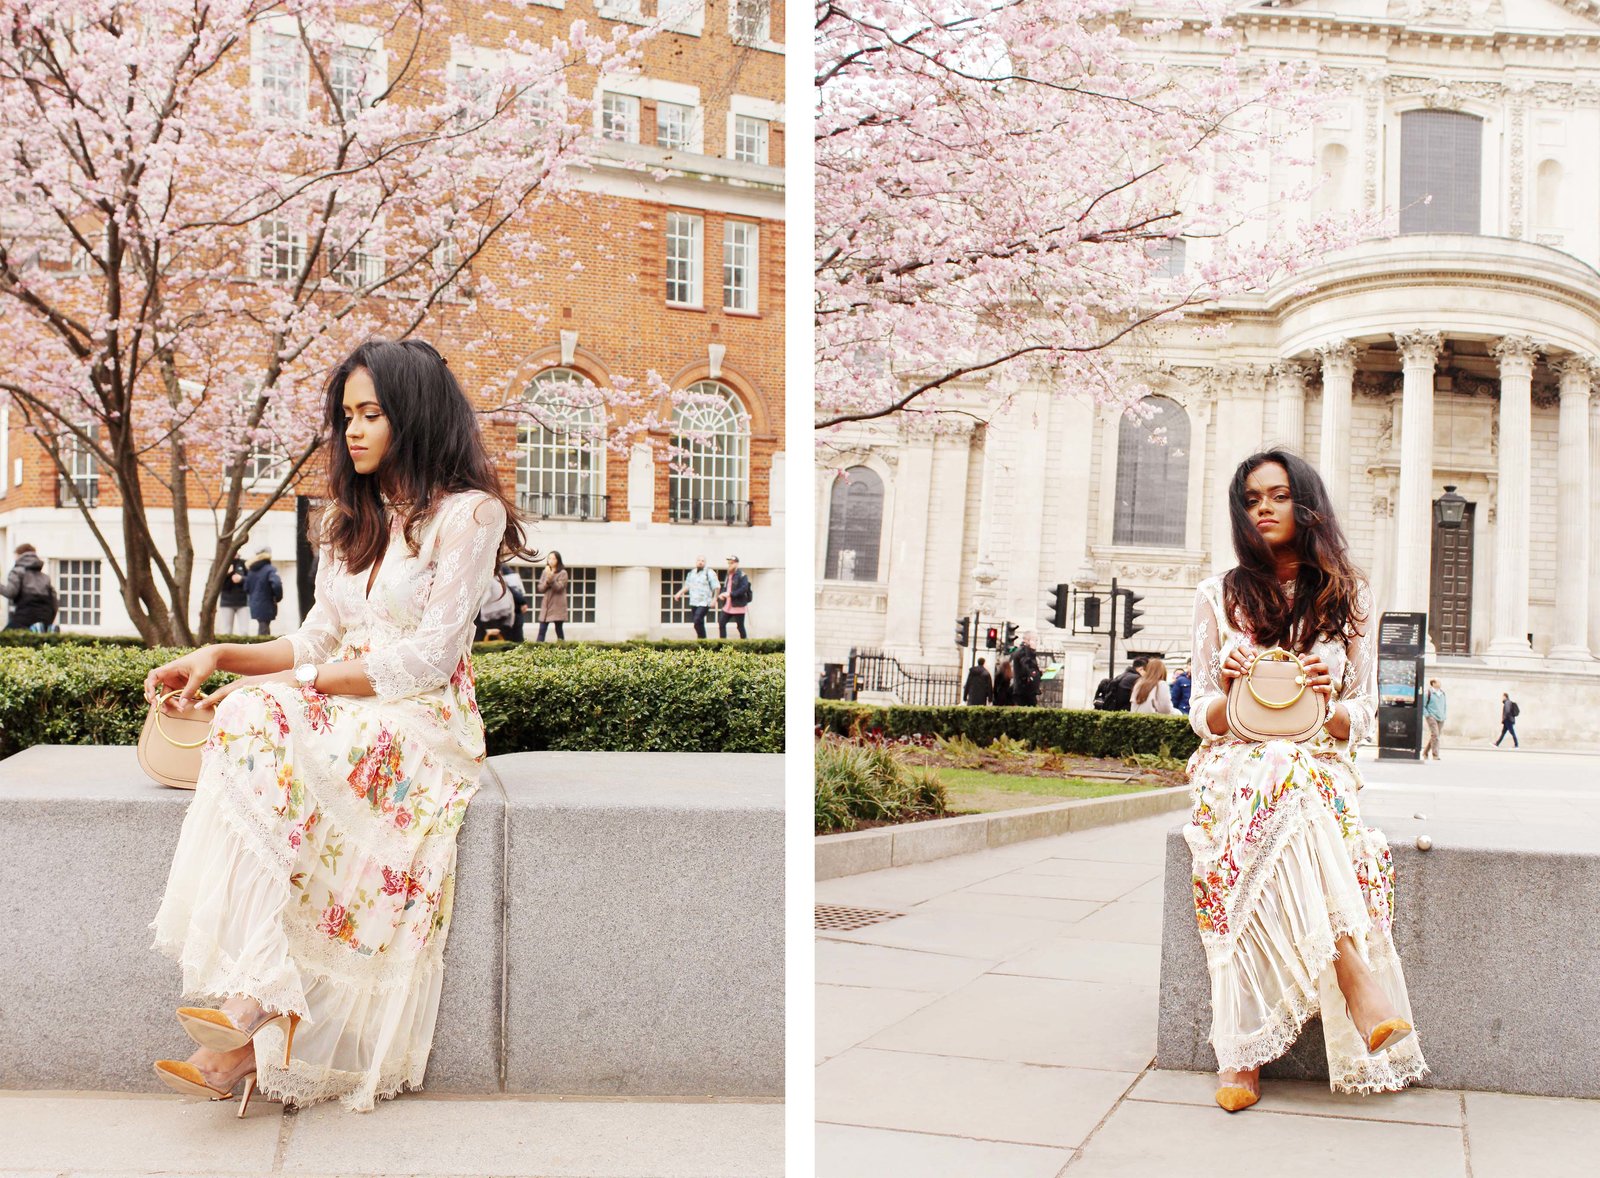 Sachini sitting wearing a floral dress with a Chloé bag